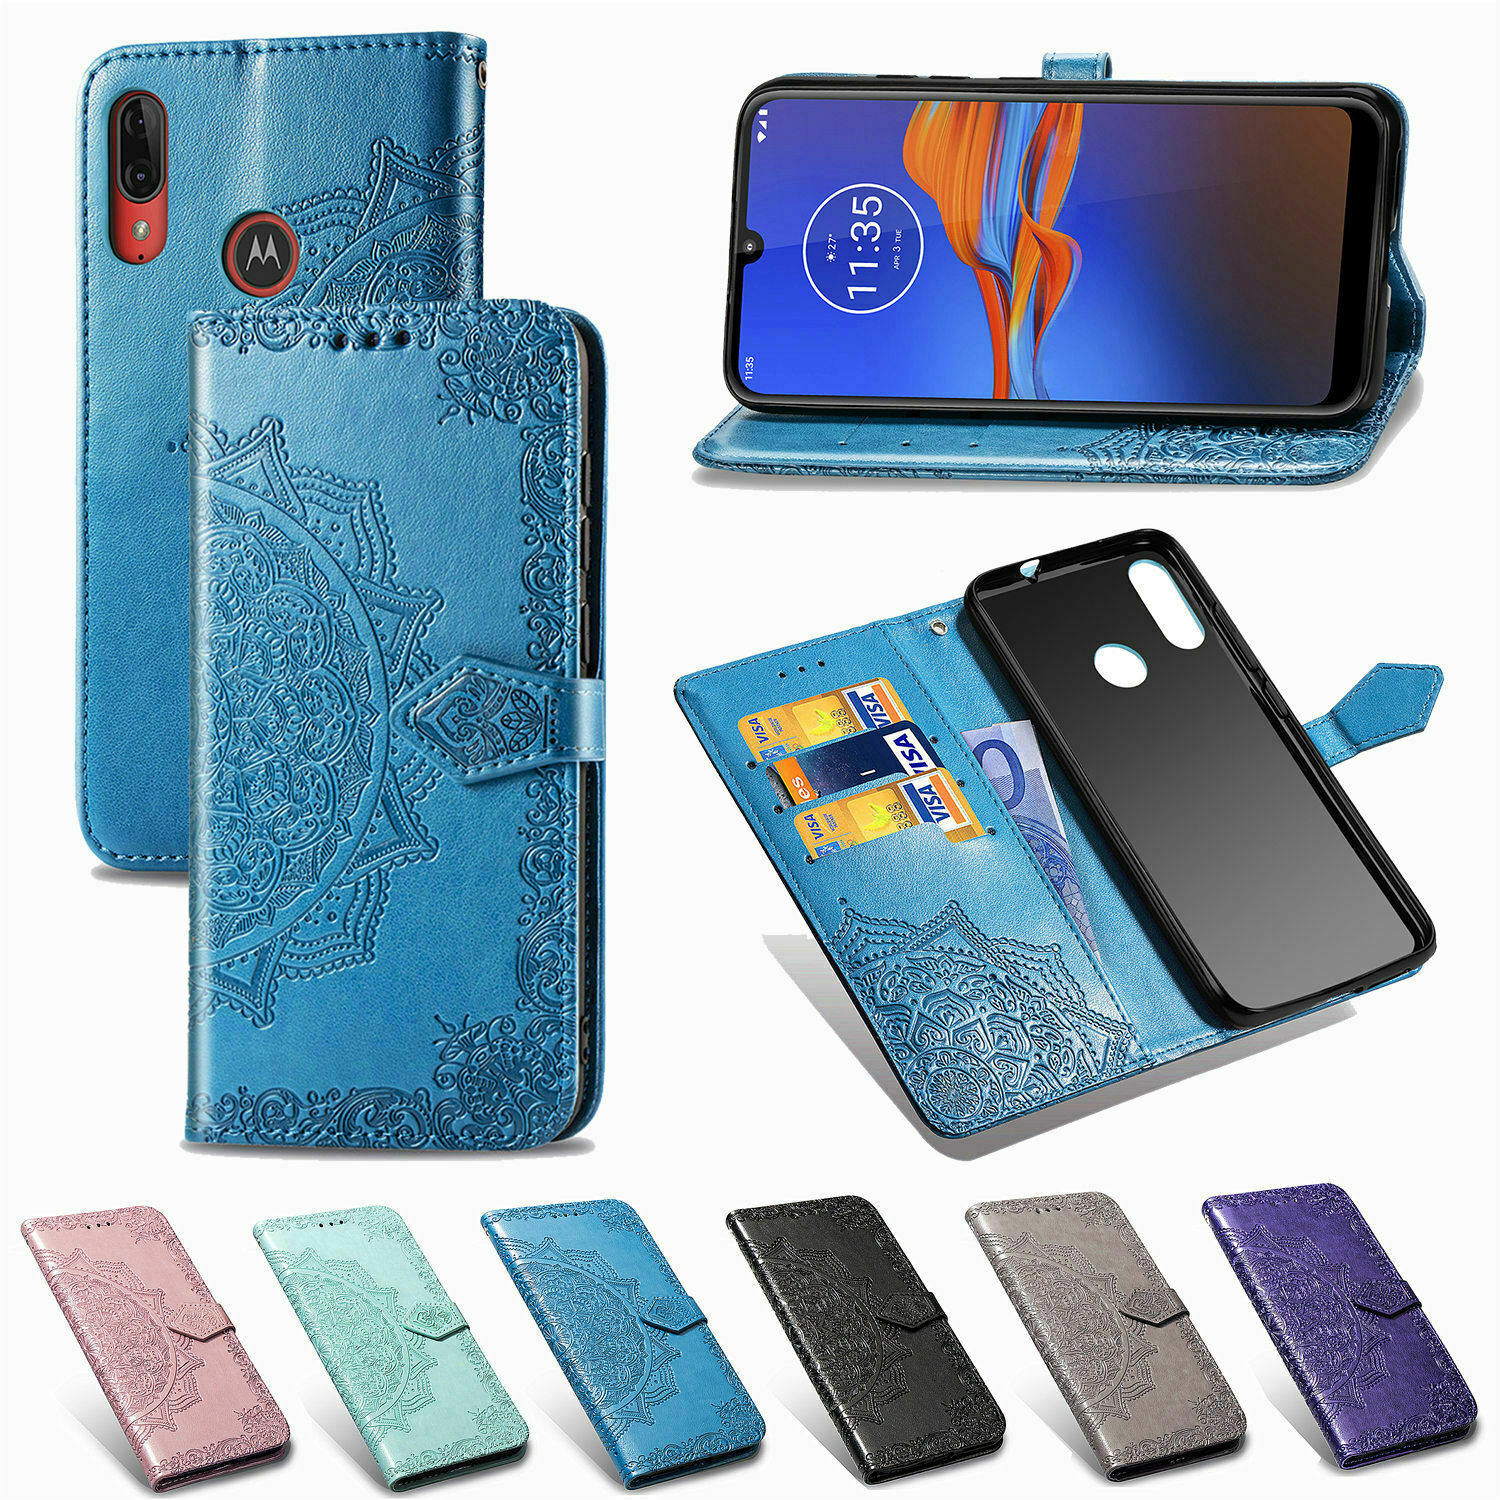 For Motorola Moto G9 Plus Play E6 G Pro G8 Power Patterned Leather Wallet Cover